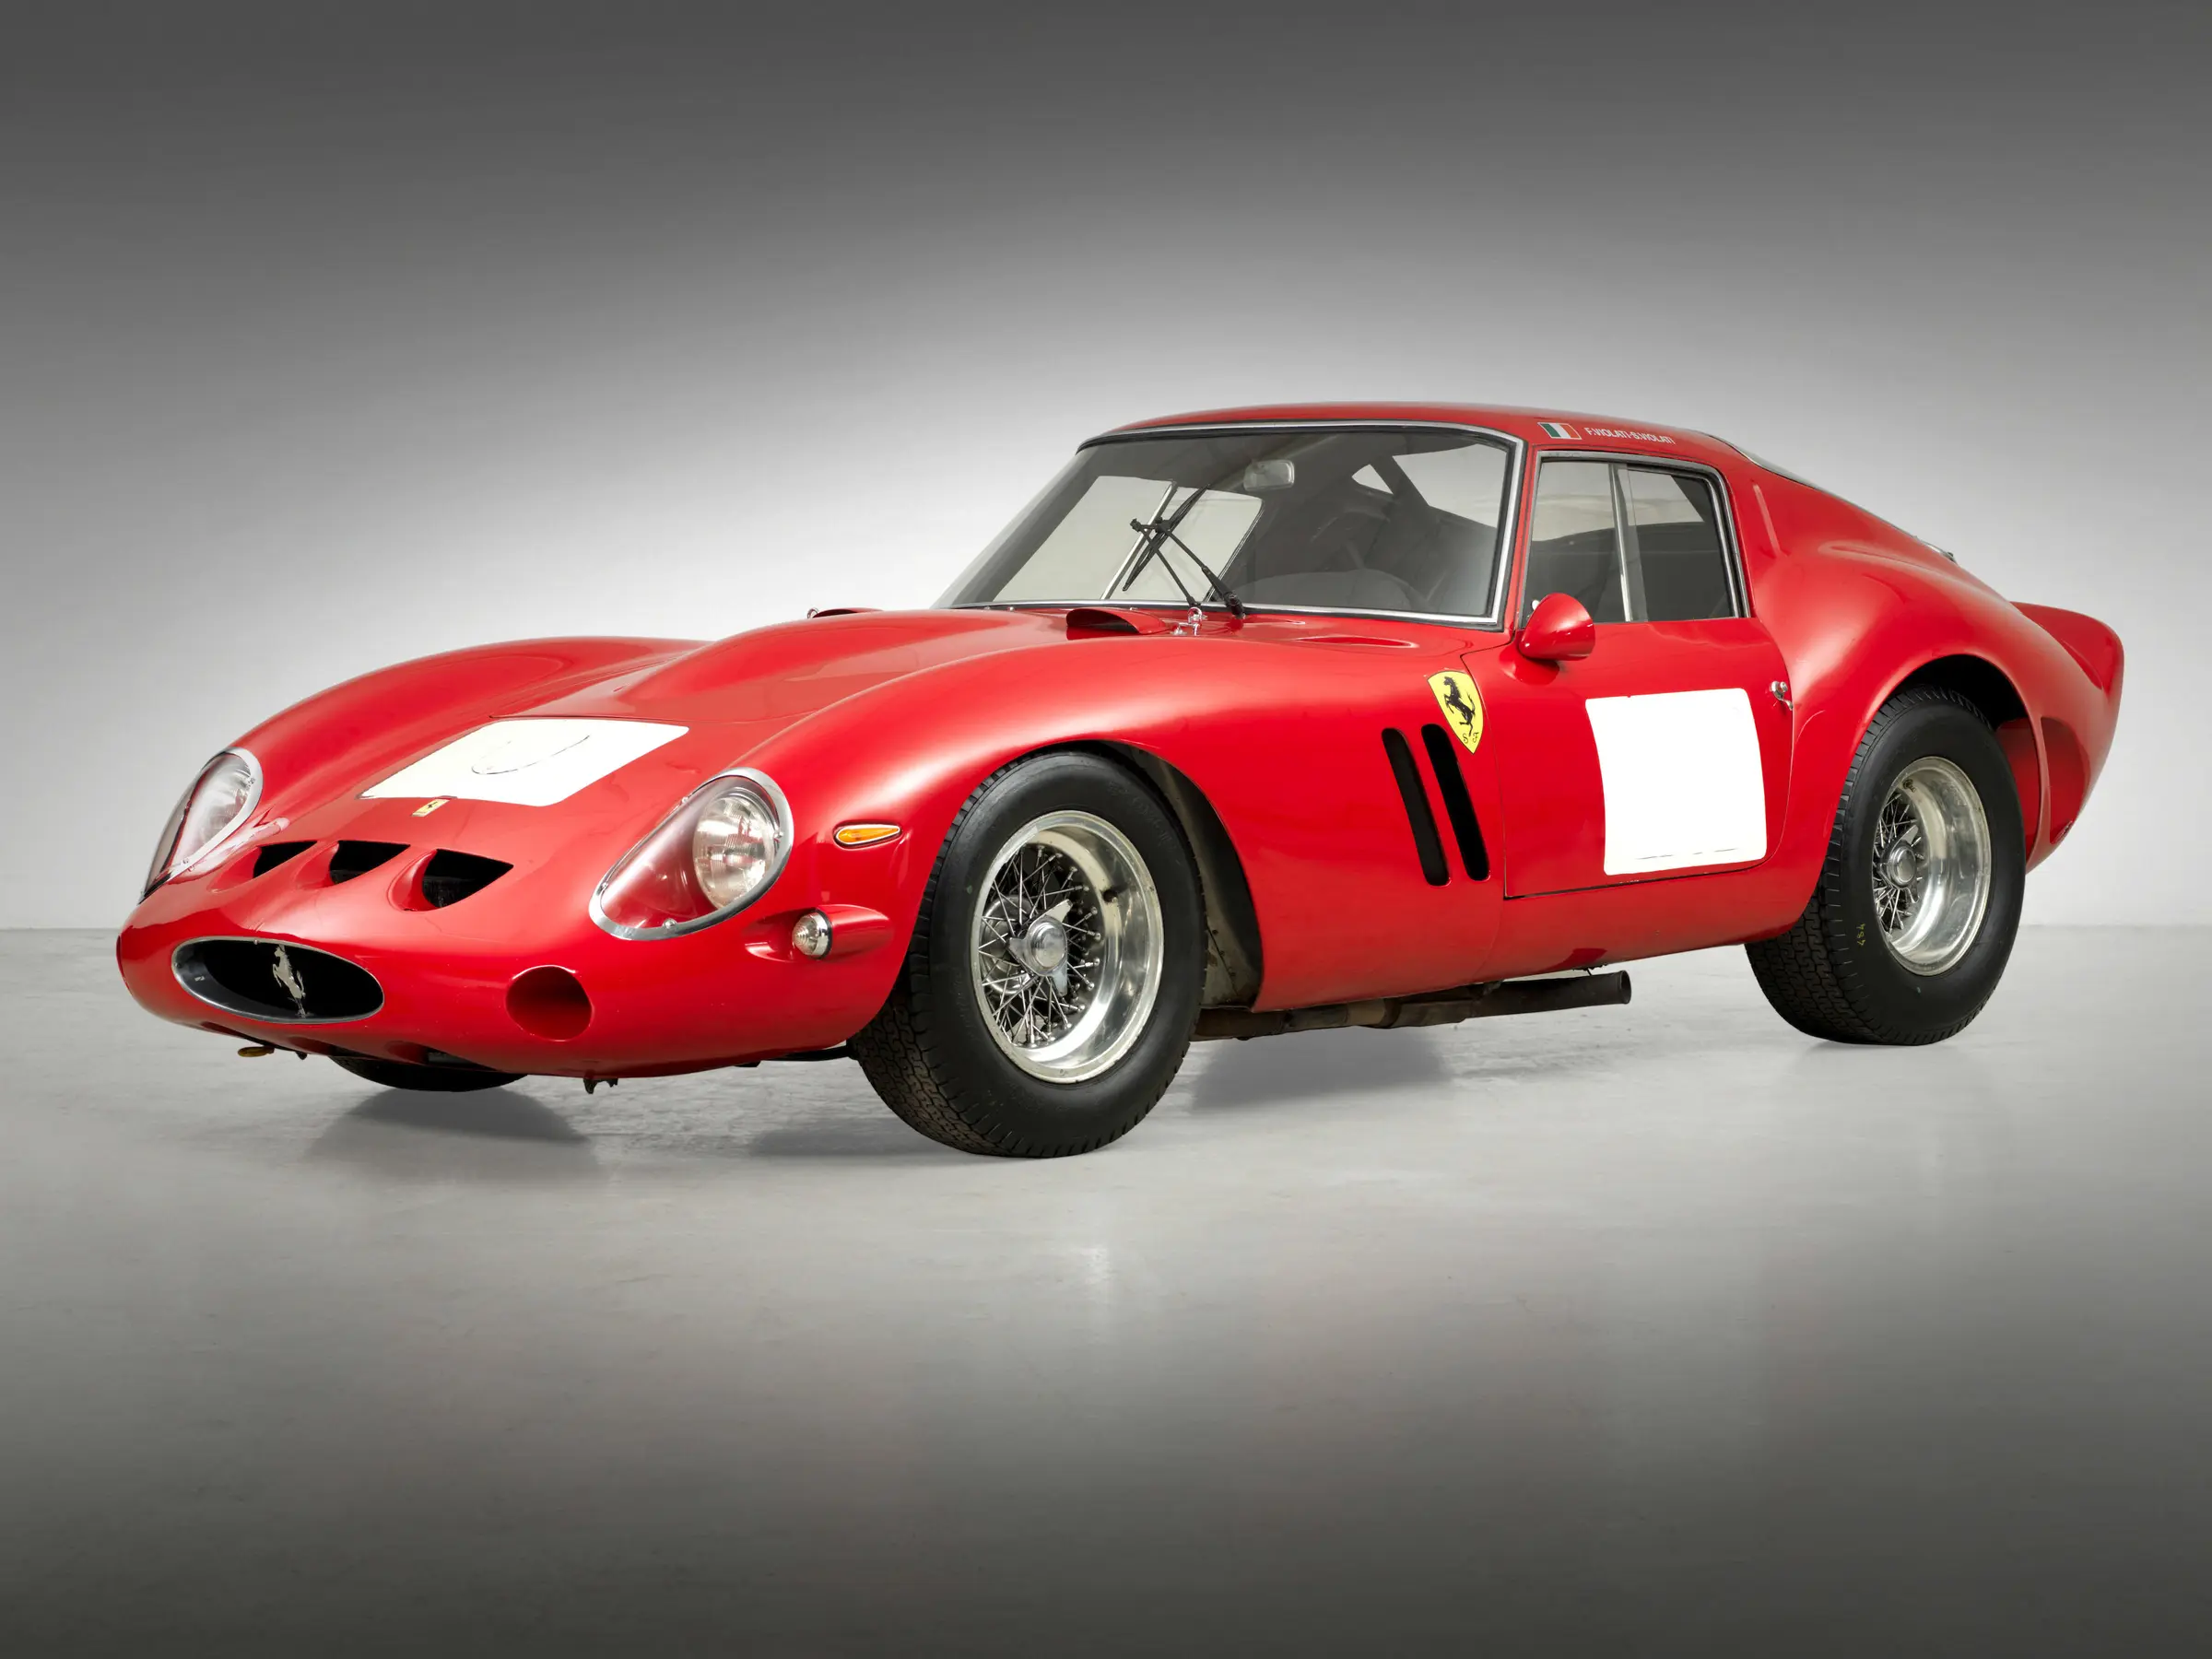 The Top 10 Classics Every Car Enthusiast Might Look to Own